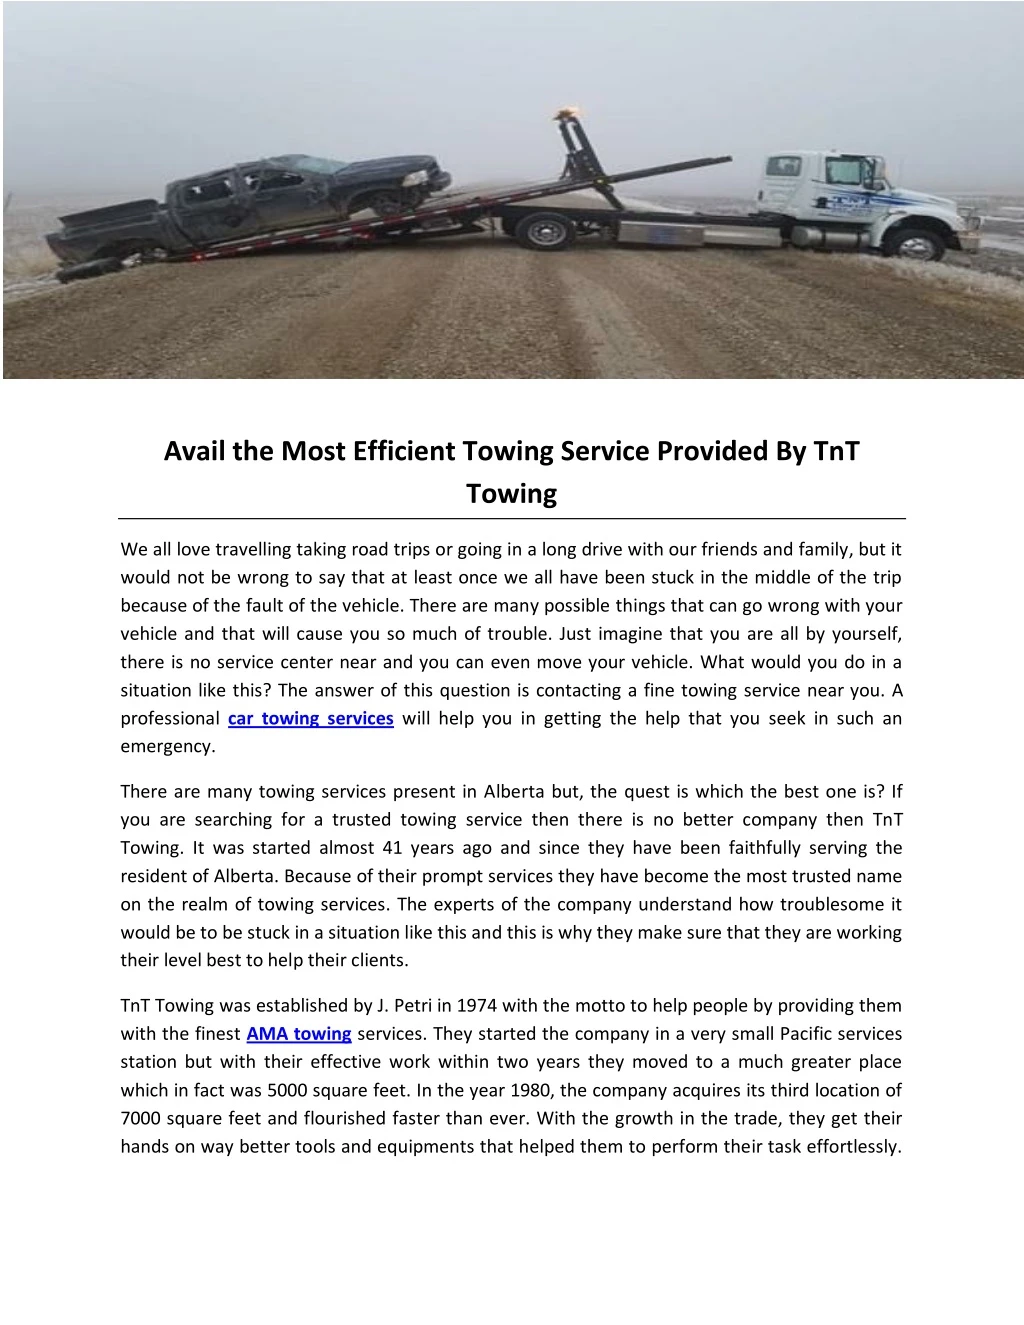 avail the most efficient towing service provided